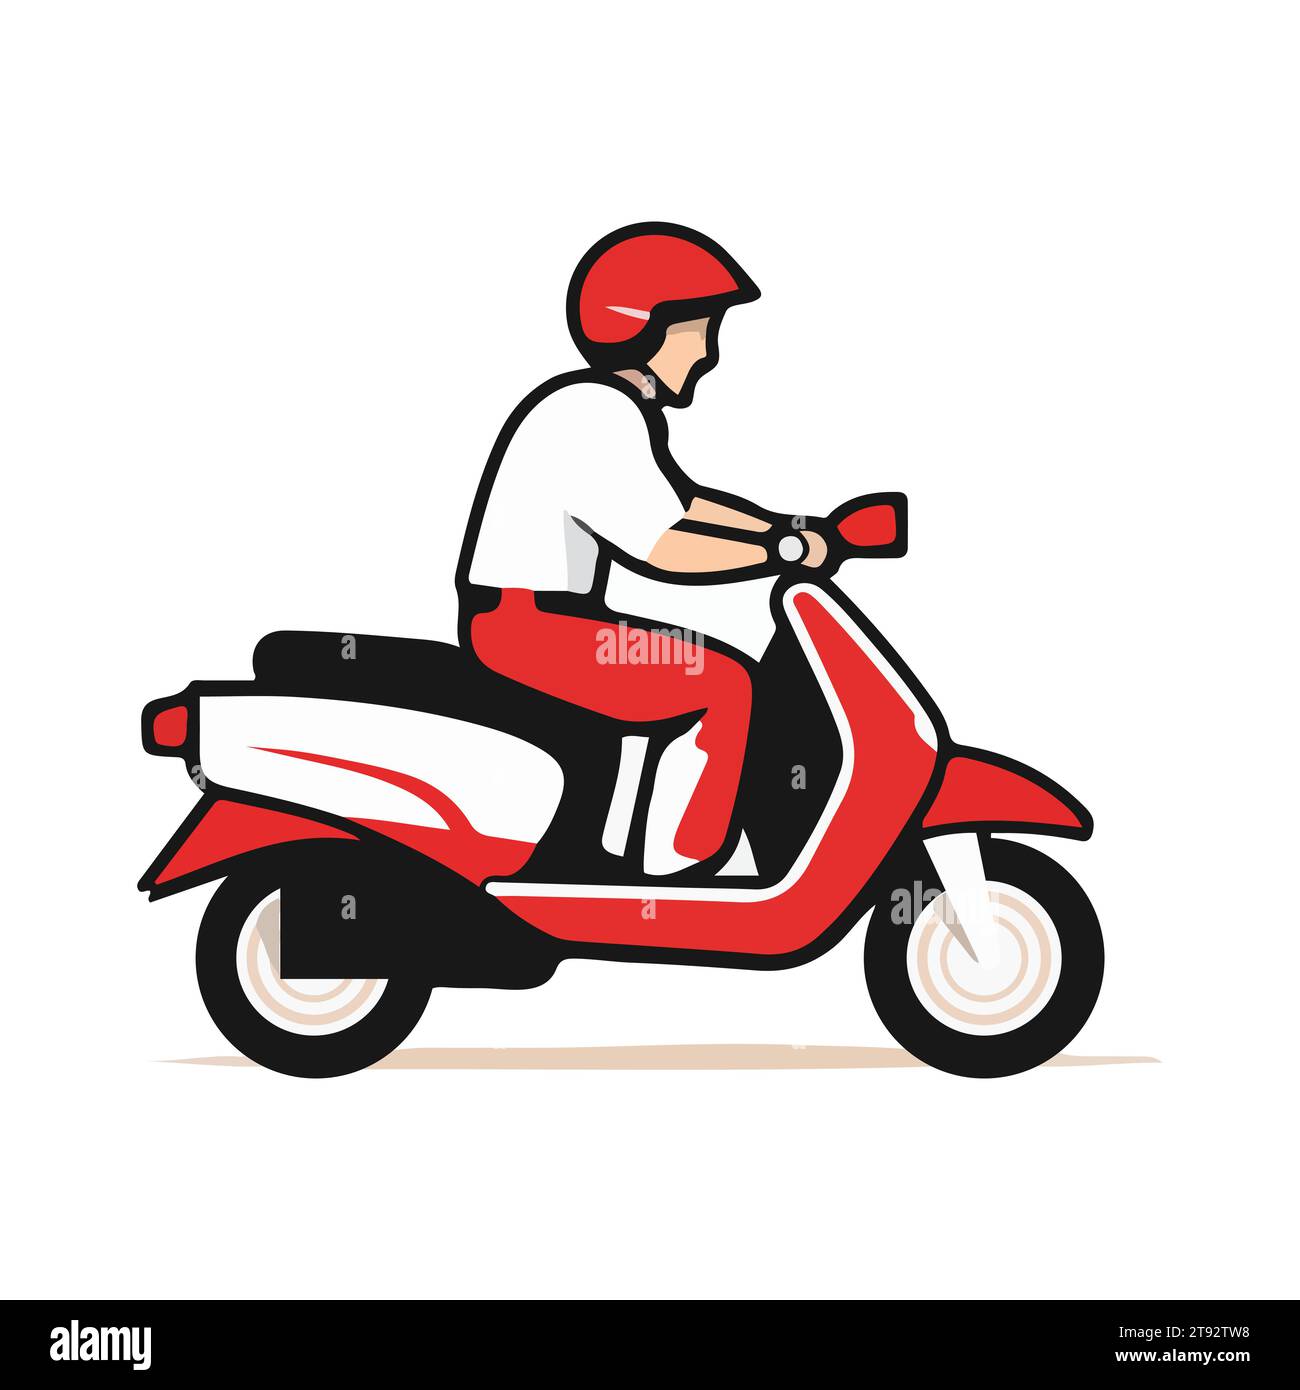 Delivery Man Riding A Red Scooter Isolated On White Background Food Delivery Man Cartoon Style